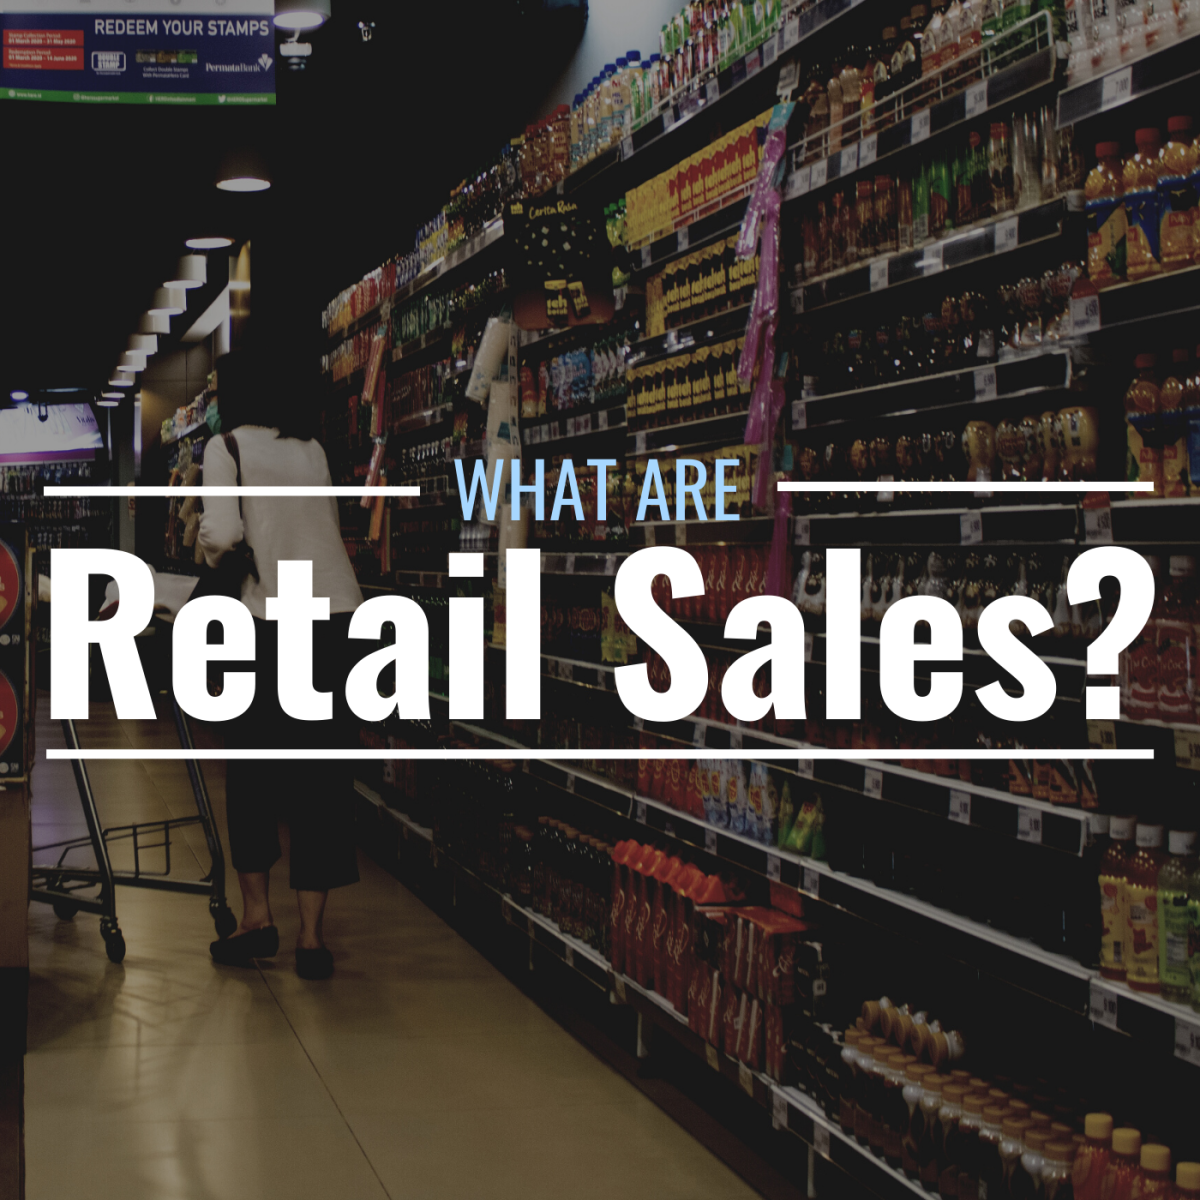 Photo of a shopper at a supermarket with text overlay that reads "What Are Retail Sales?"